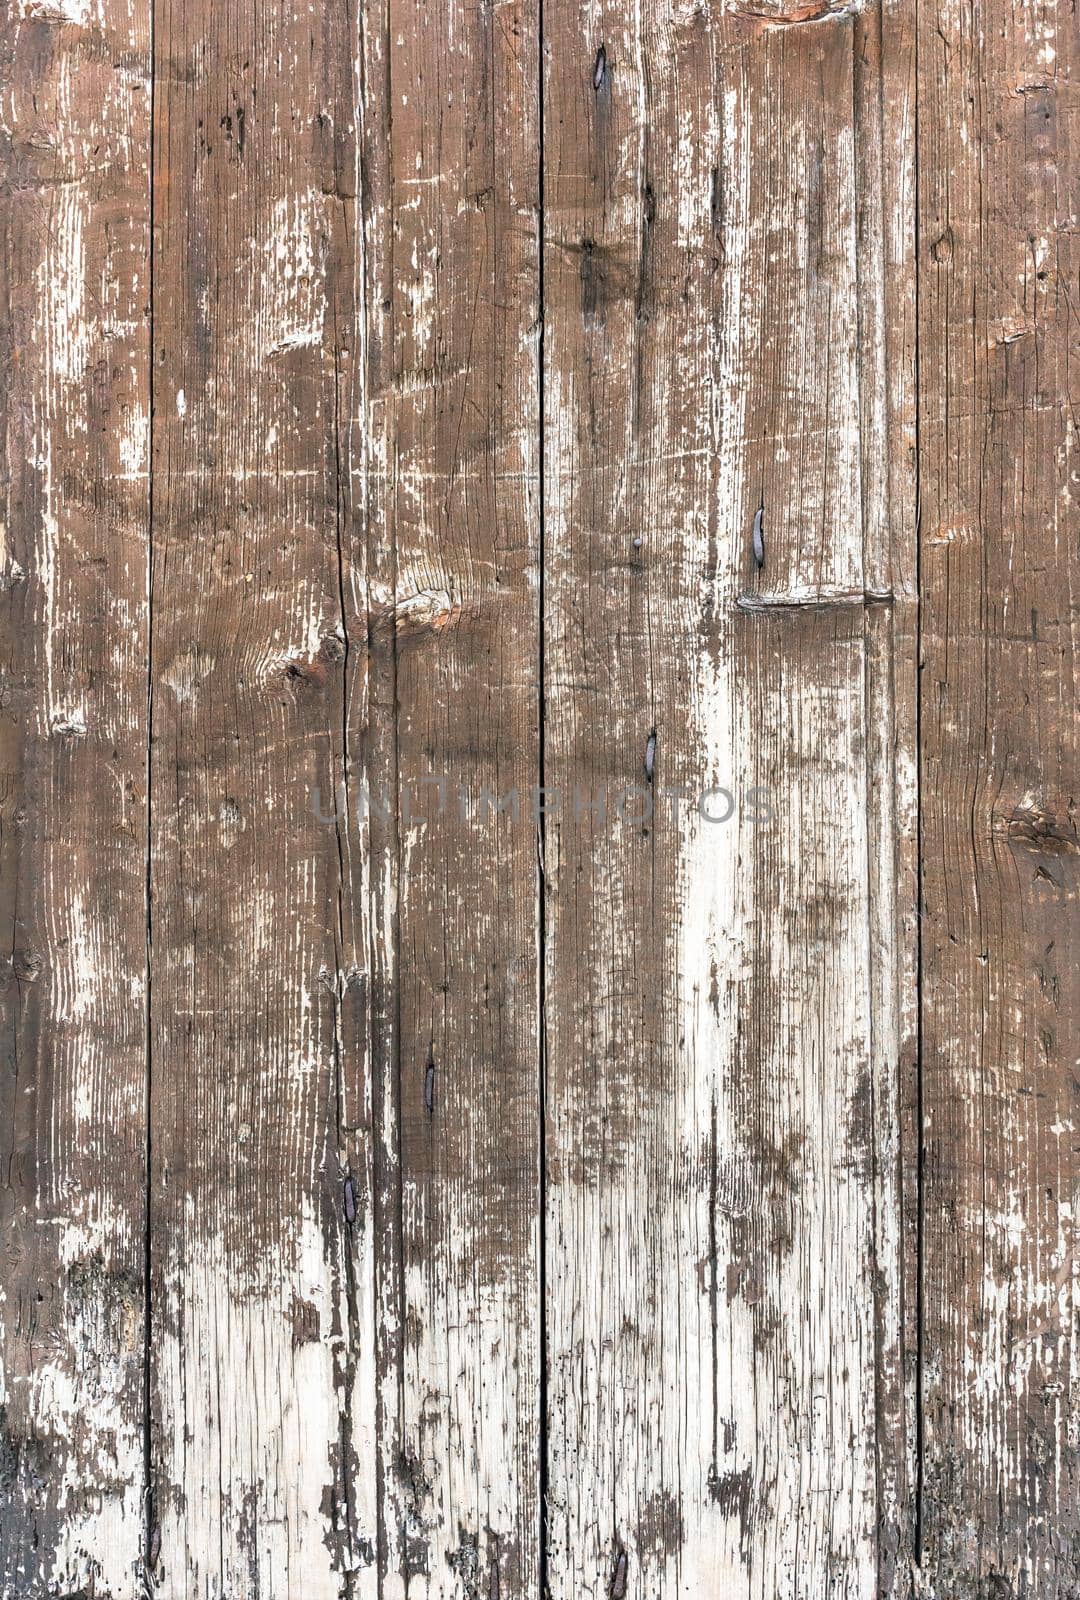 Weathered wooden background. Old wooden plankswith peeling paint. Background of old painted wood fragment.